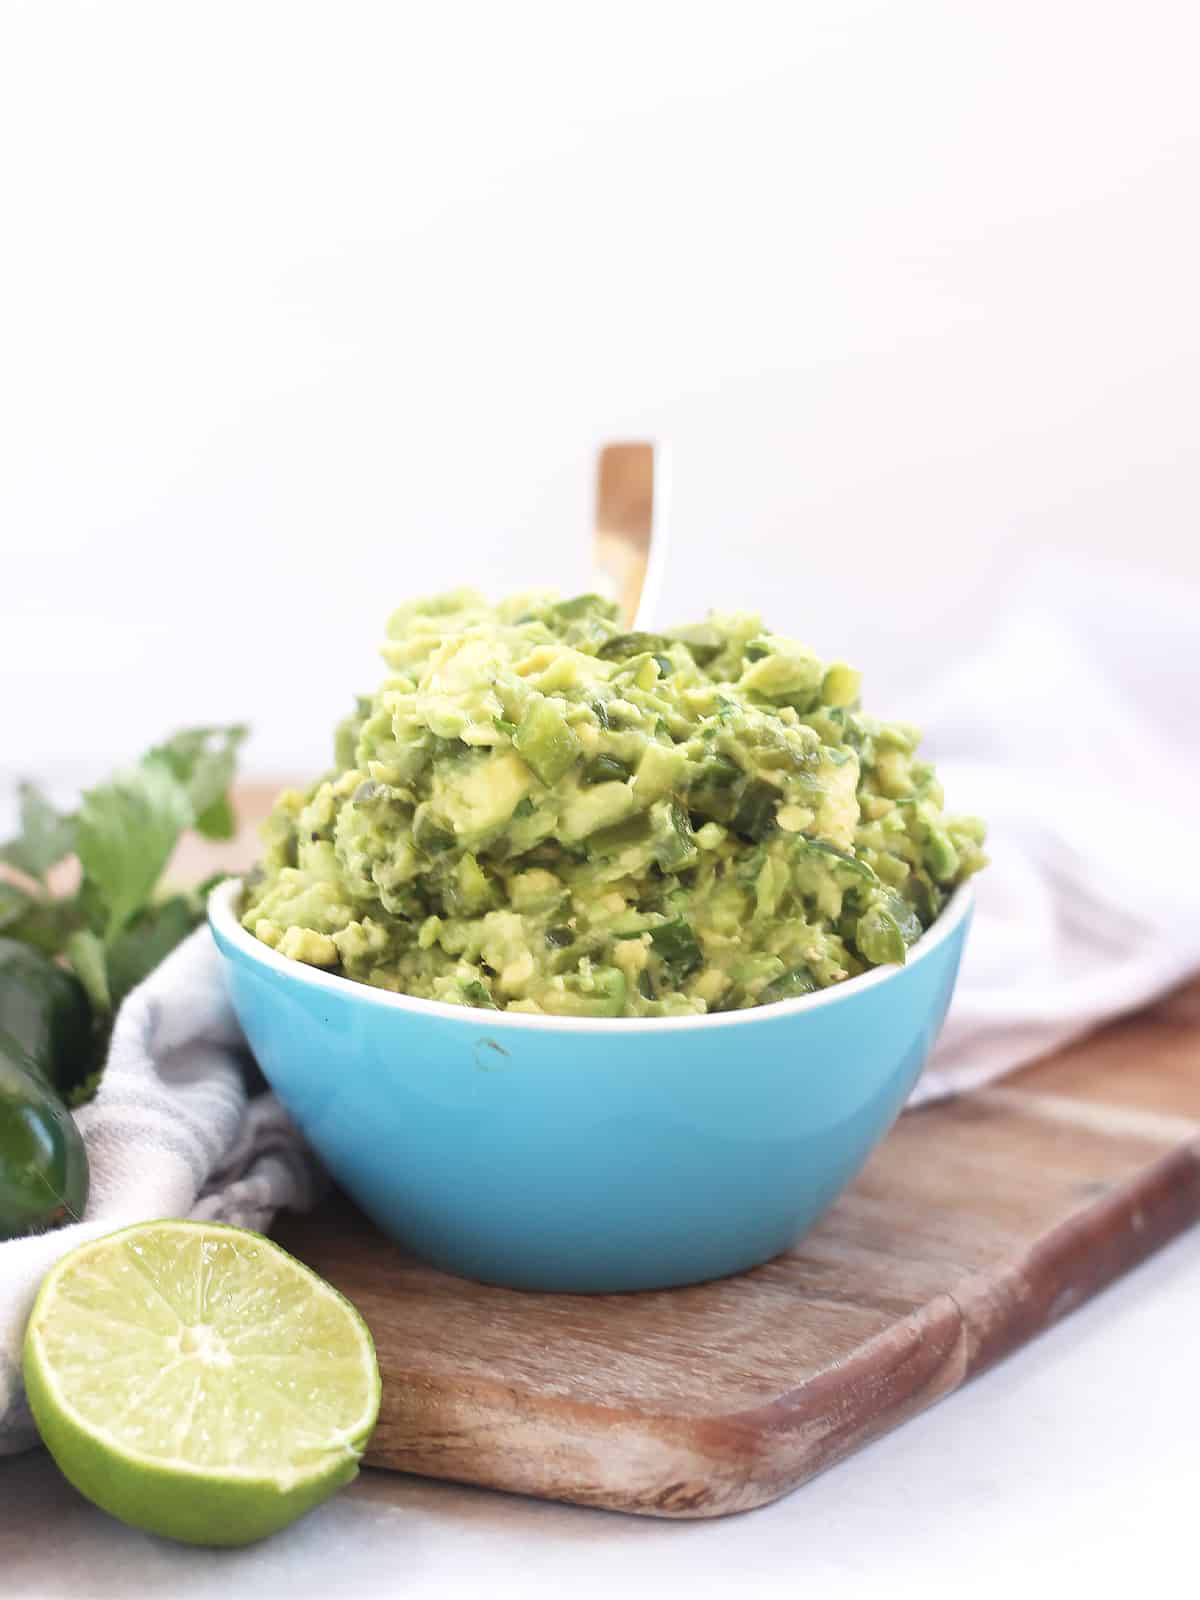 A bowl of guacamole on a wooden chopping board.